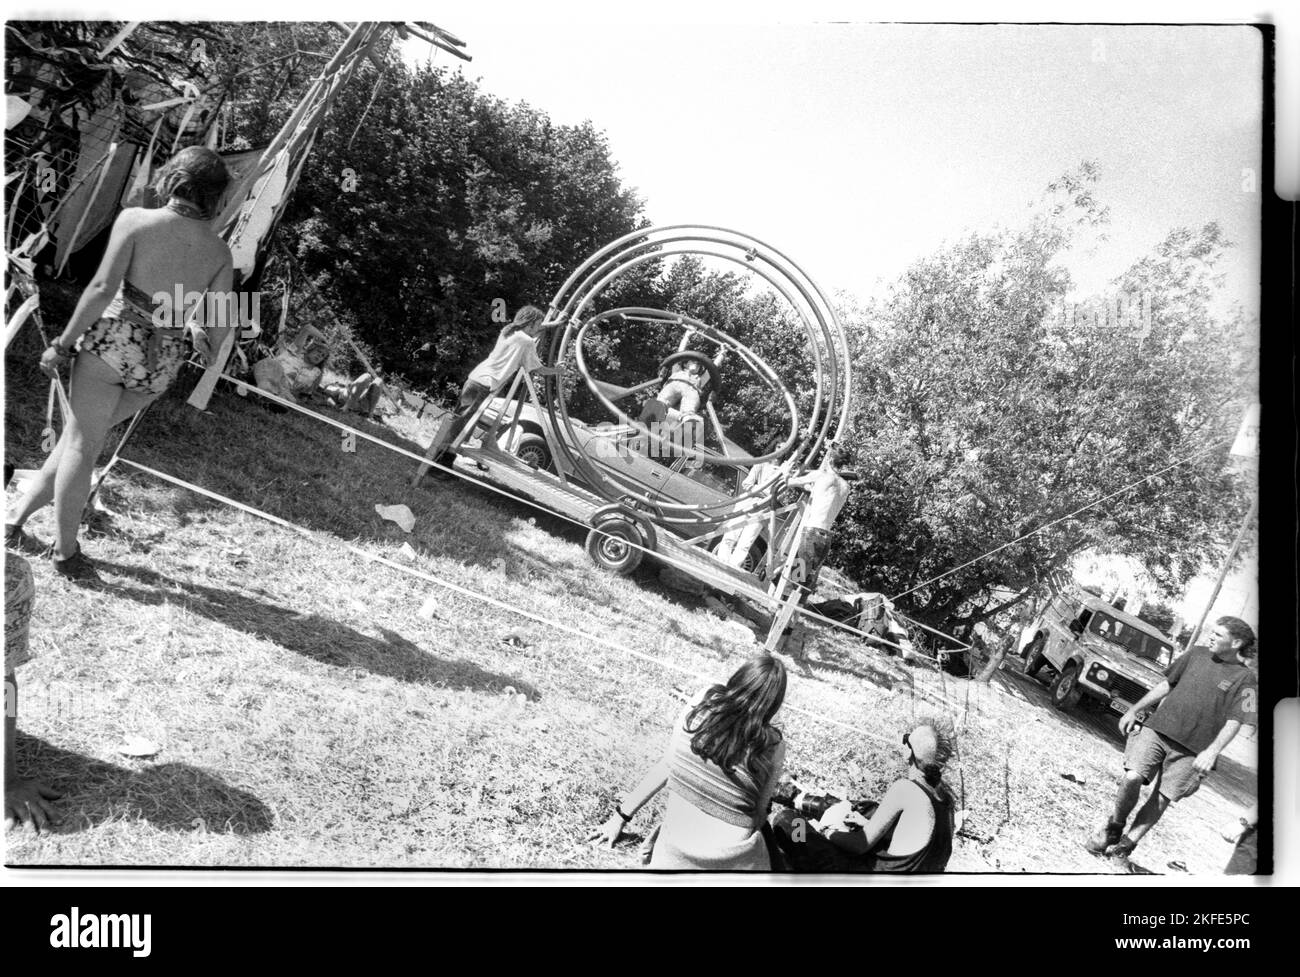 Practice time on the gyroscope in the Circus Field at Glastonbury Festival, Pilton, England, June 26-28 1992. Photograph: ROB WATKINS Stock Photo